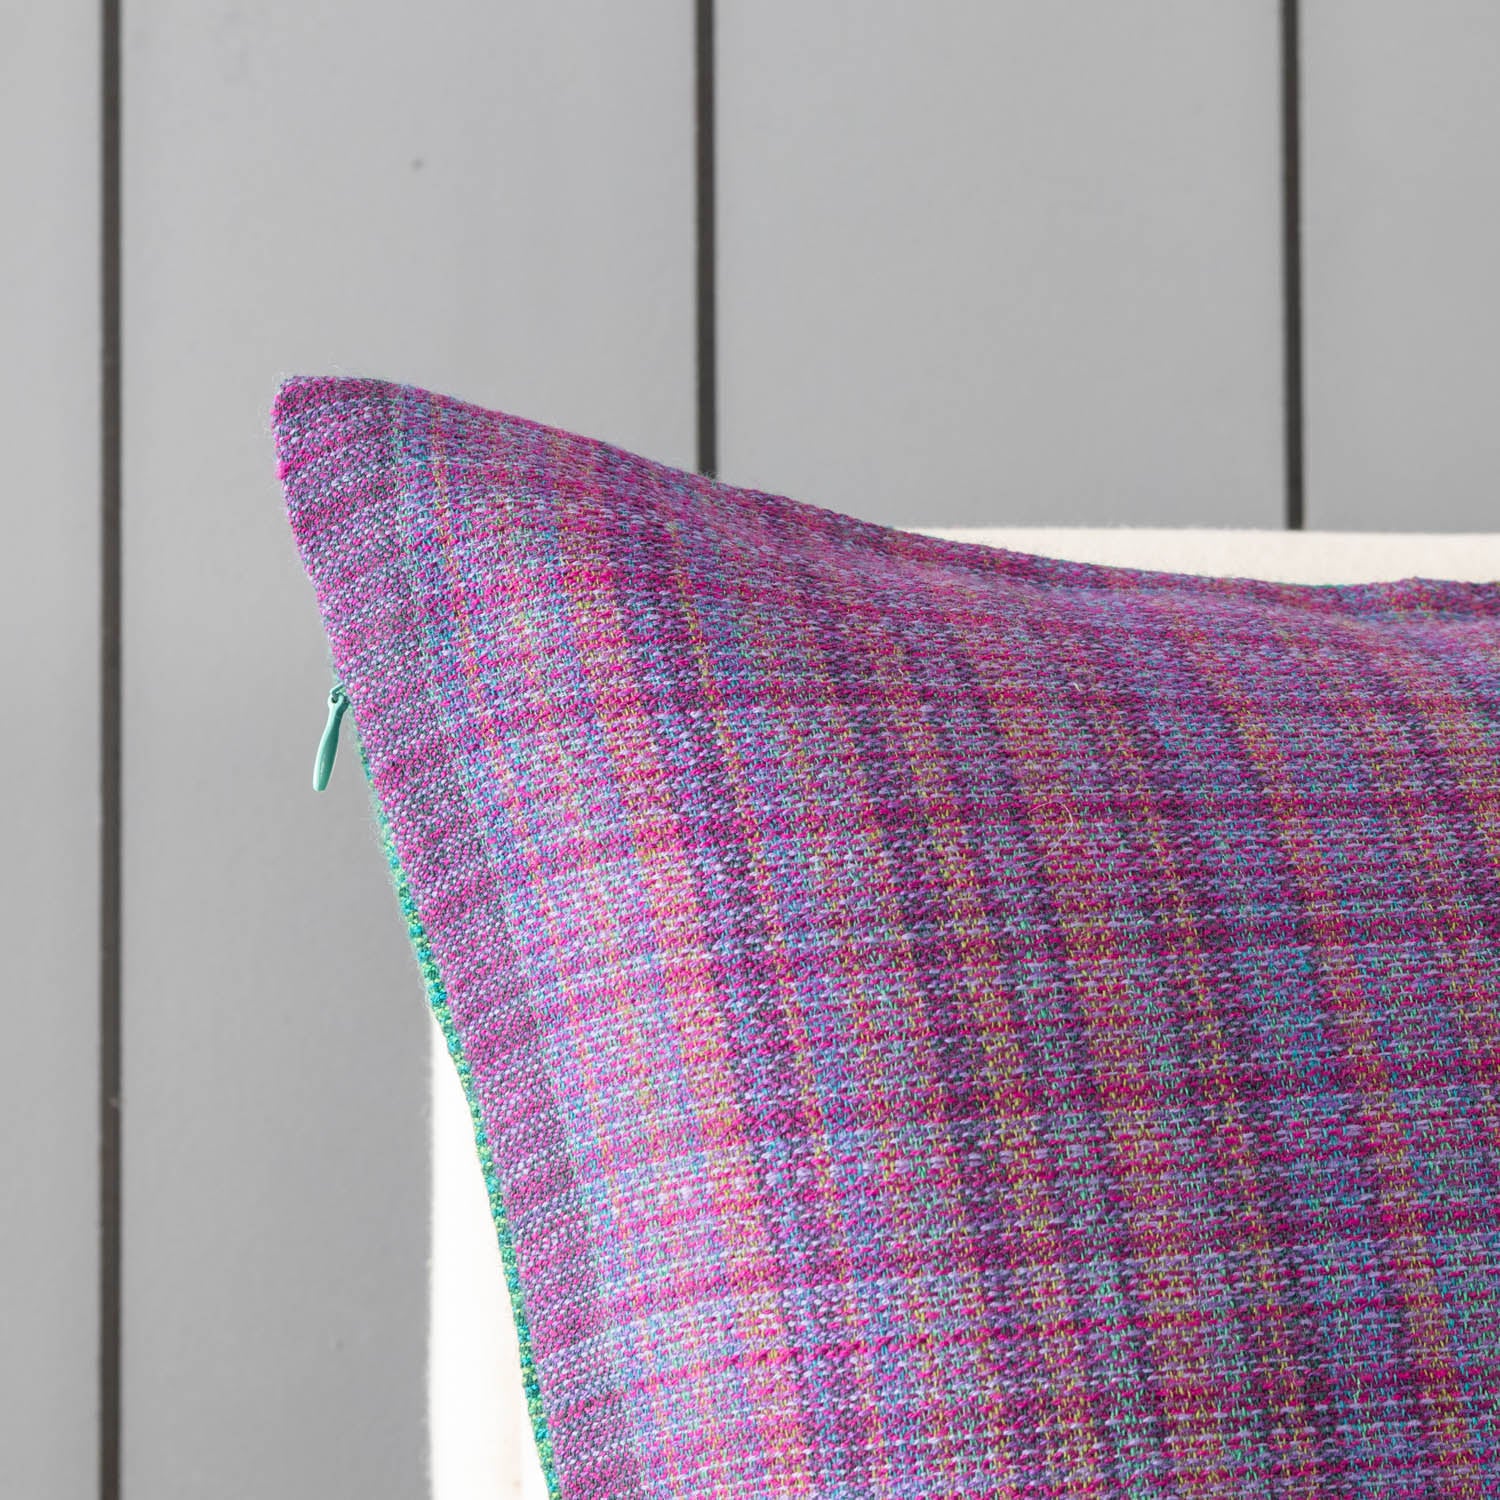 Handwoven Upcycled Green & Purple Wool Cushion Cover - 18x18